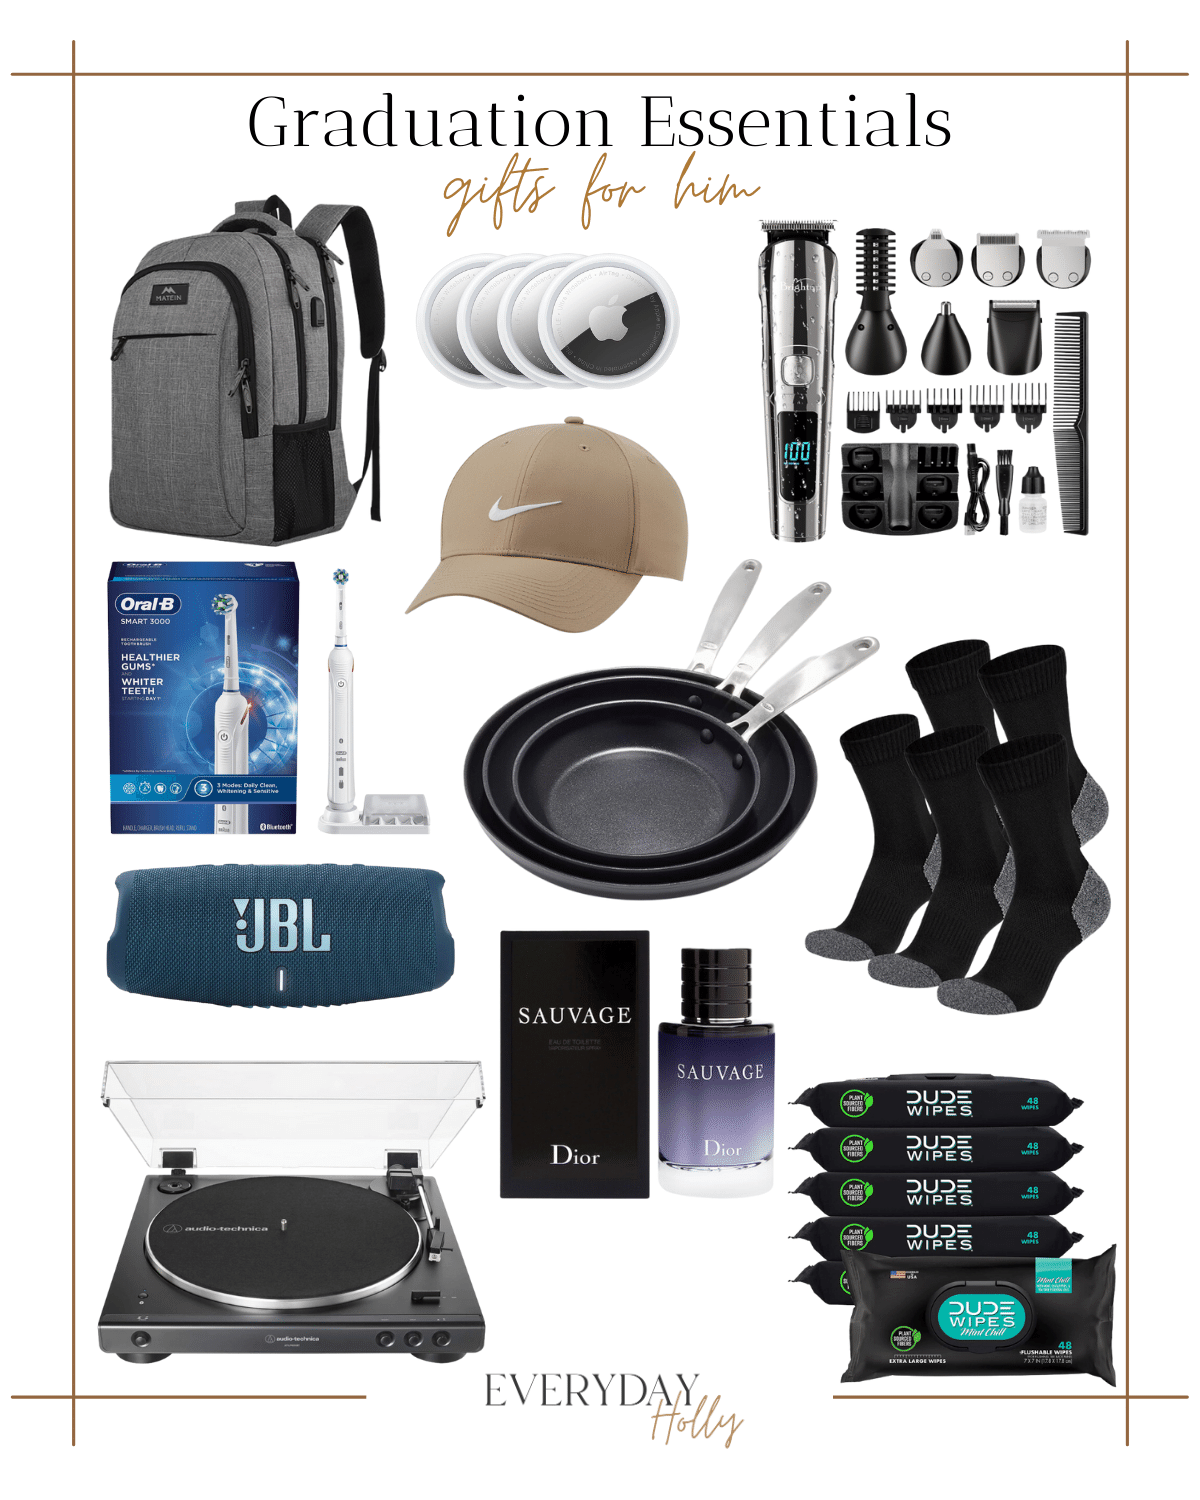 graduation essentials, graduation, graduates, gifts for him, grad gifts, backpack, beard trimmer, toothbrush, socks, speaker, hat, cookware, cologne, record player, dude wipes 